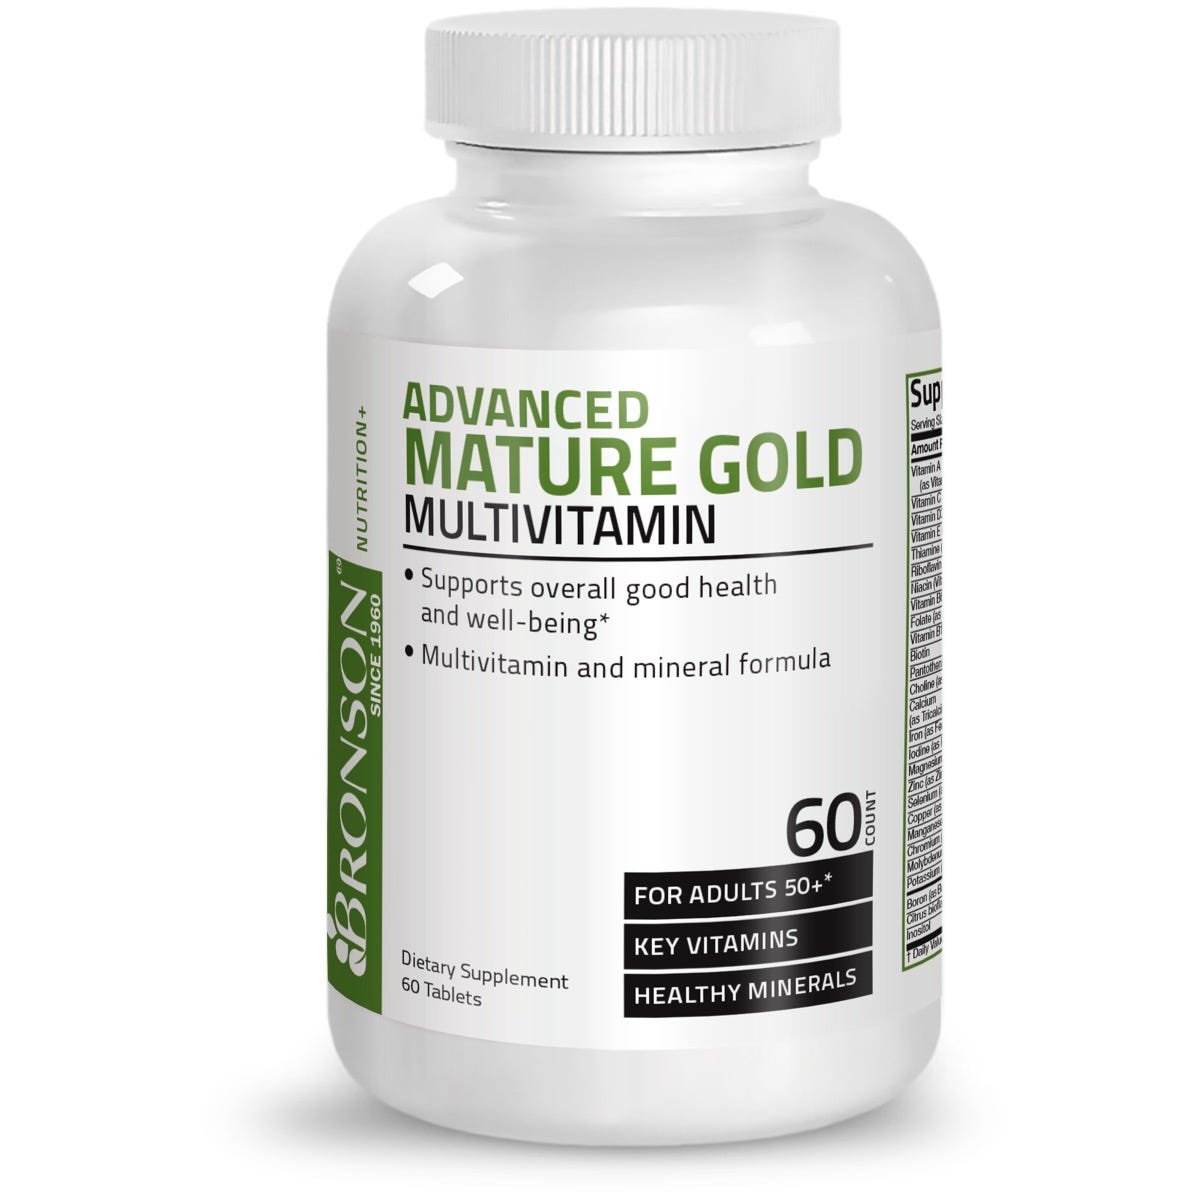 Advanced Mature Gold Once Daily Multivitamin for Adults Over 50